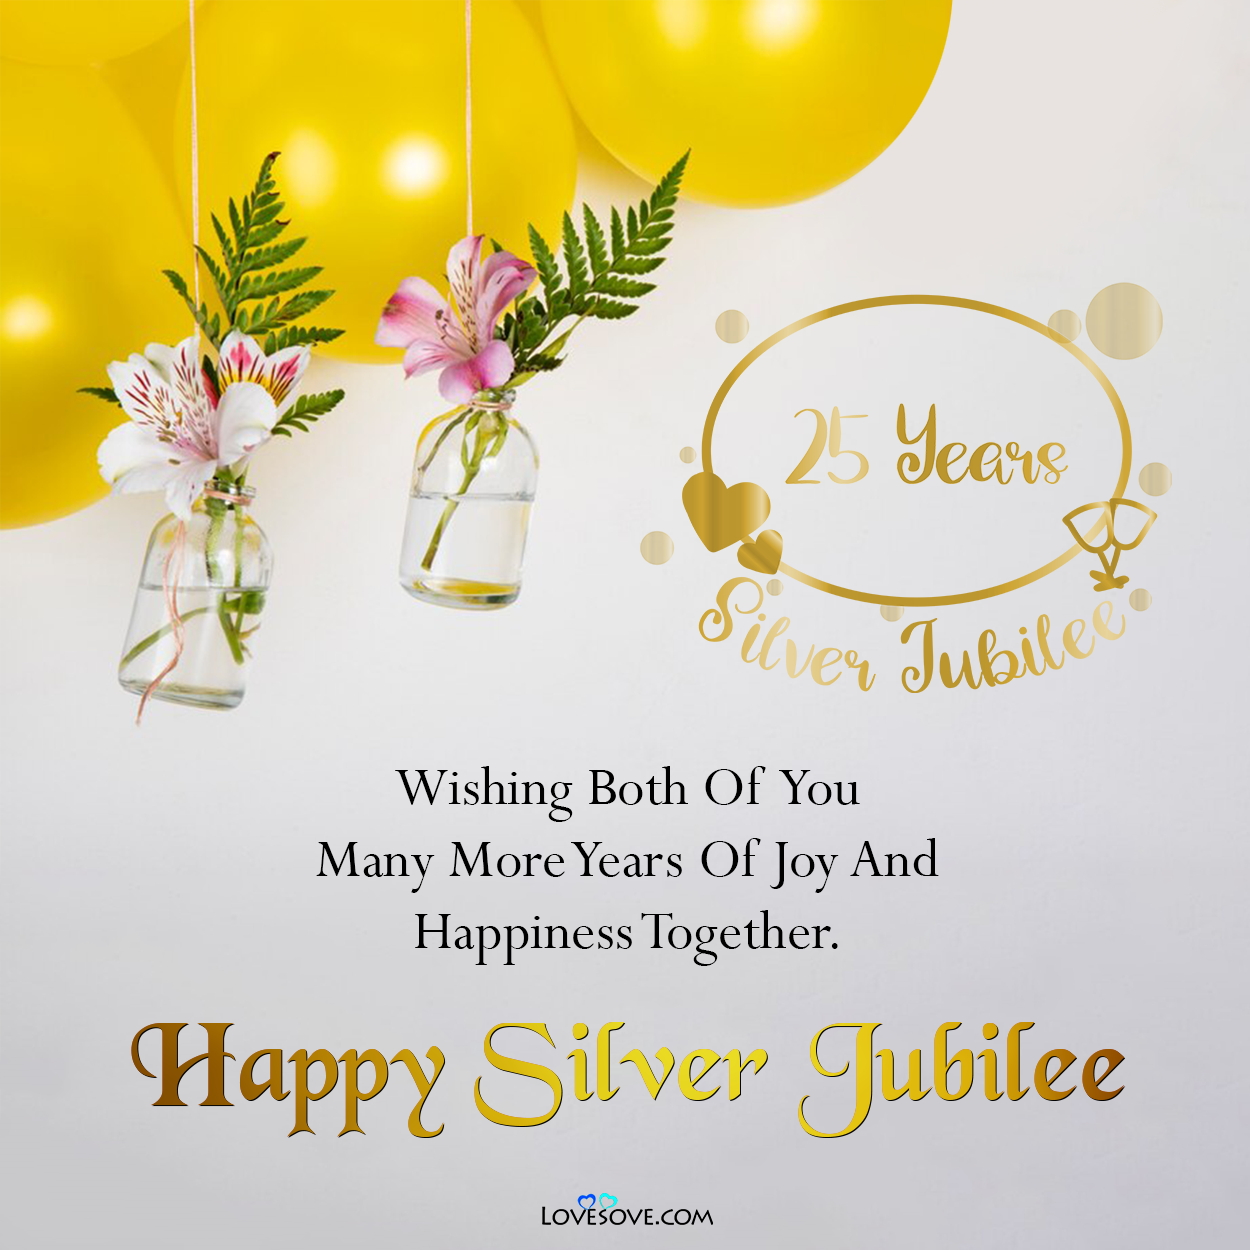 25th wedding anniversary quotes for wife, silver jubilee anniversary wishes 